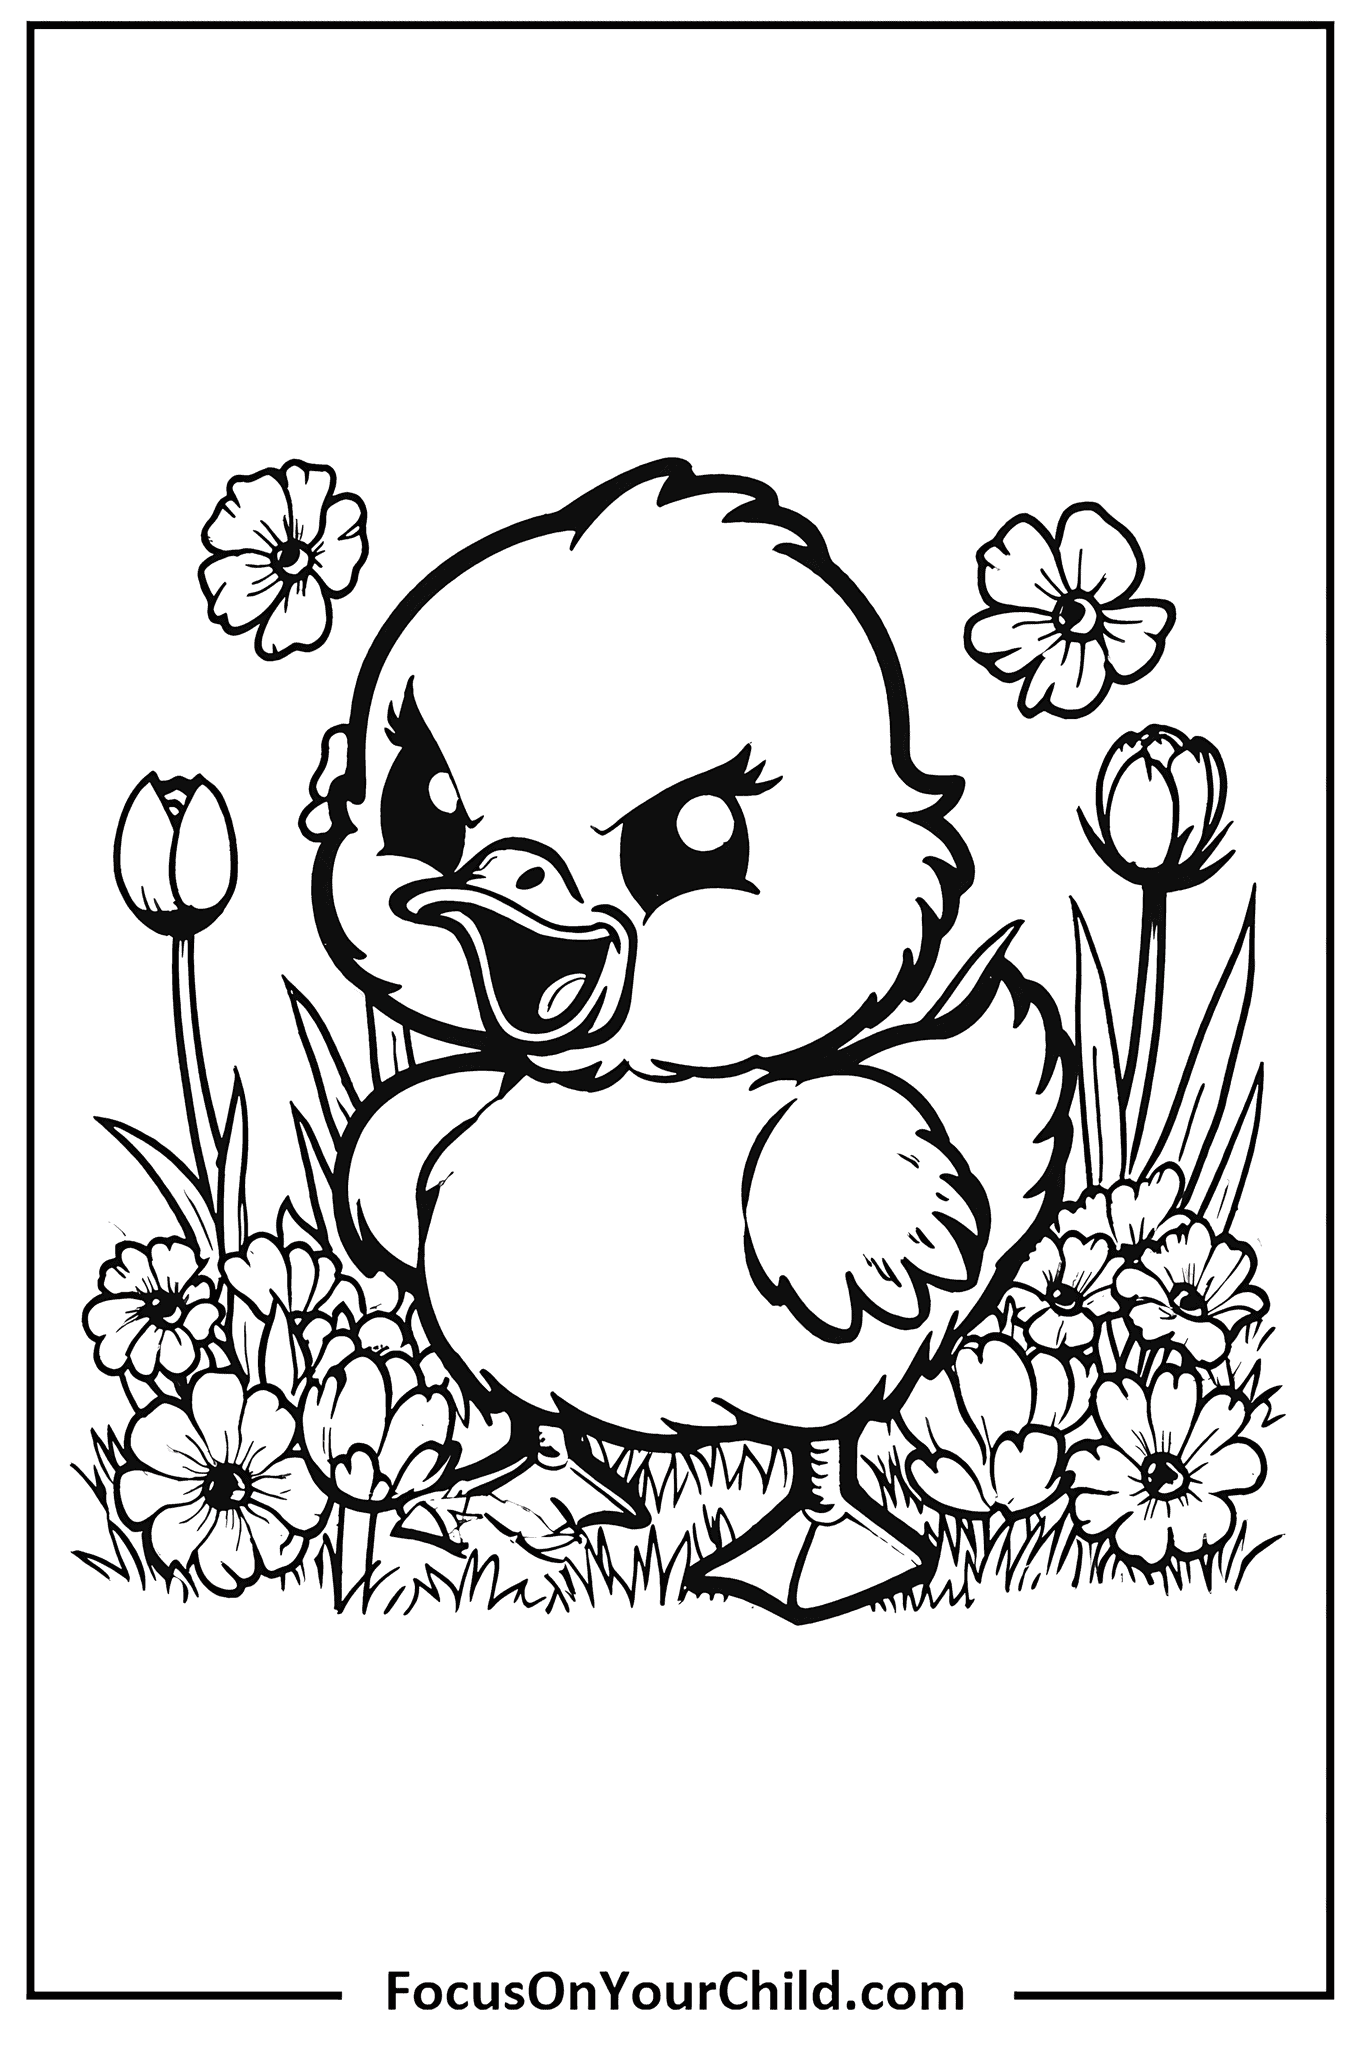 Cute chick in garden coloring page for kids on FocusOnYourChild.com.